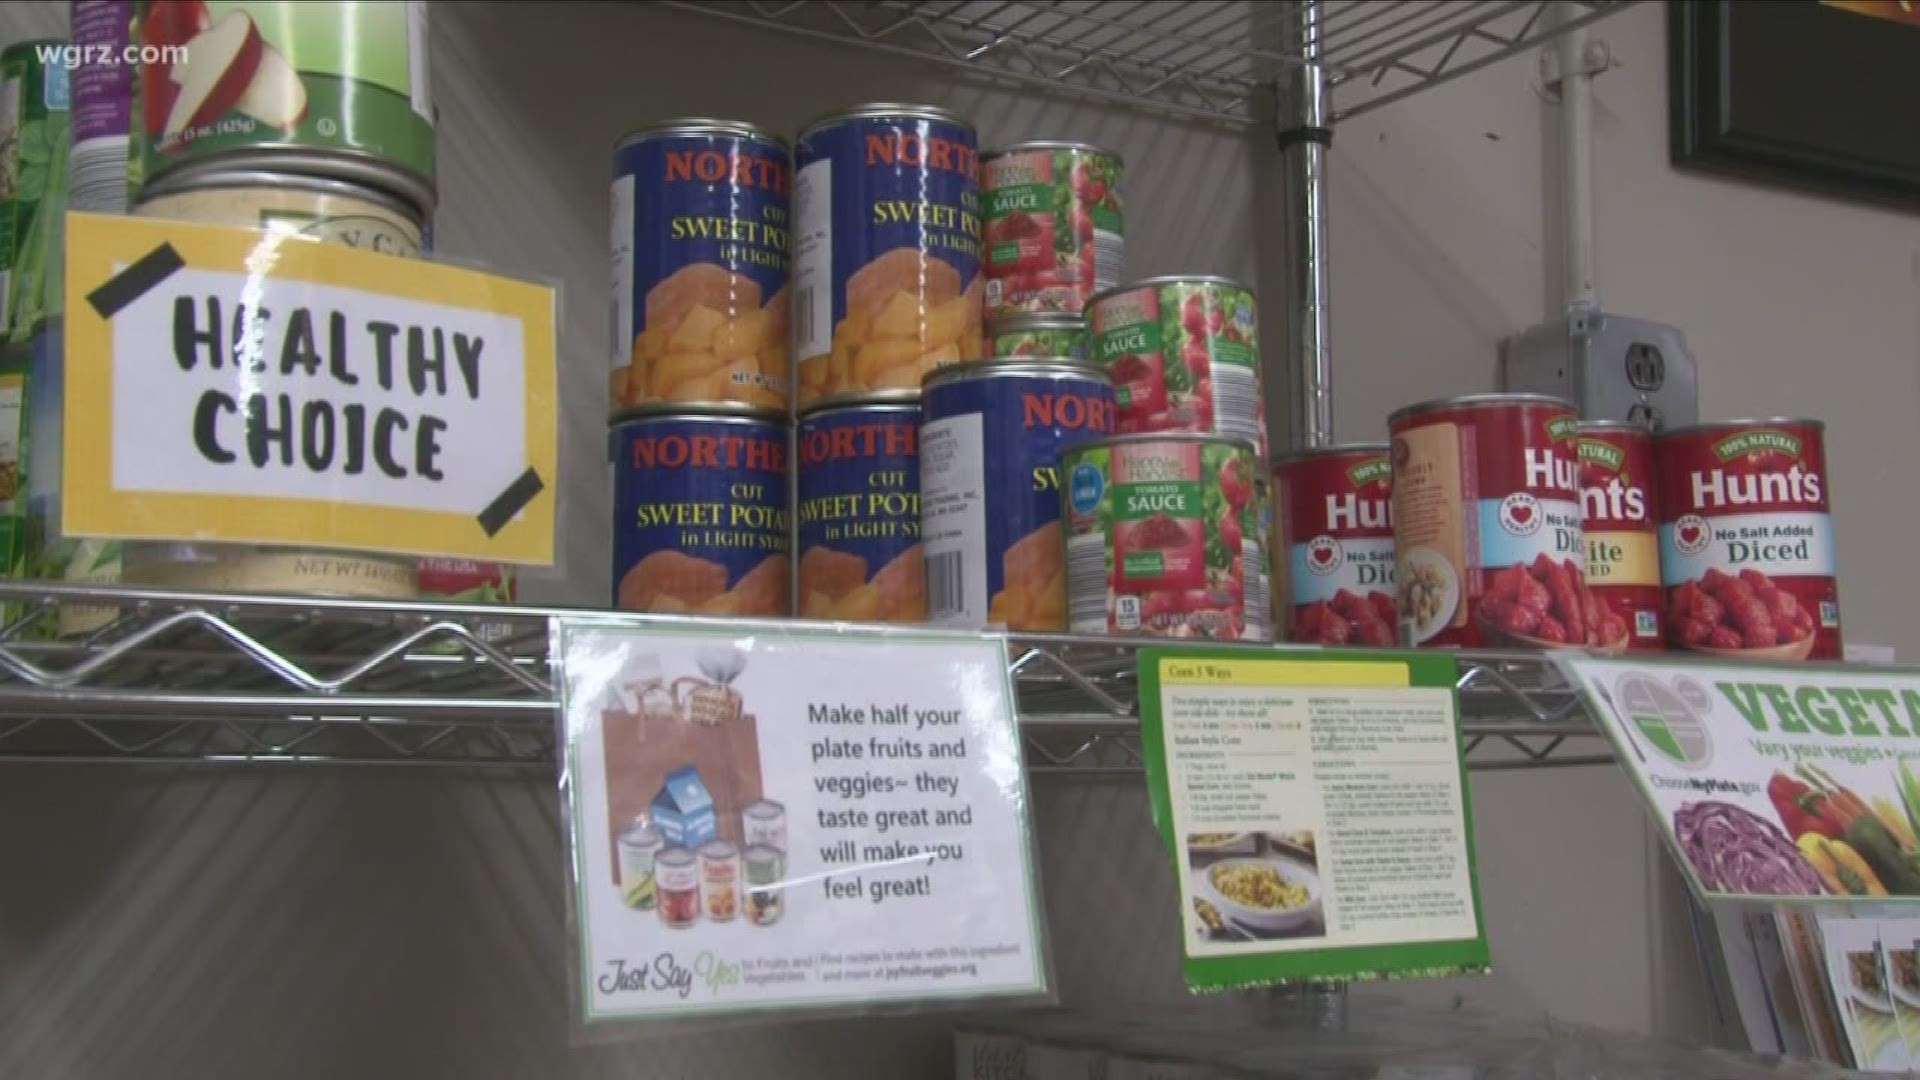 In 2018, Governor Cuomo announced the "No Student Goes Hungry Program," calling for food pantries or stigma-free access to free food at all SUNY/CUNY schools.